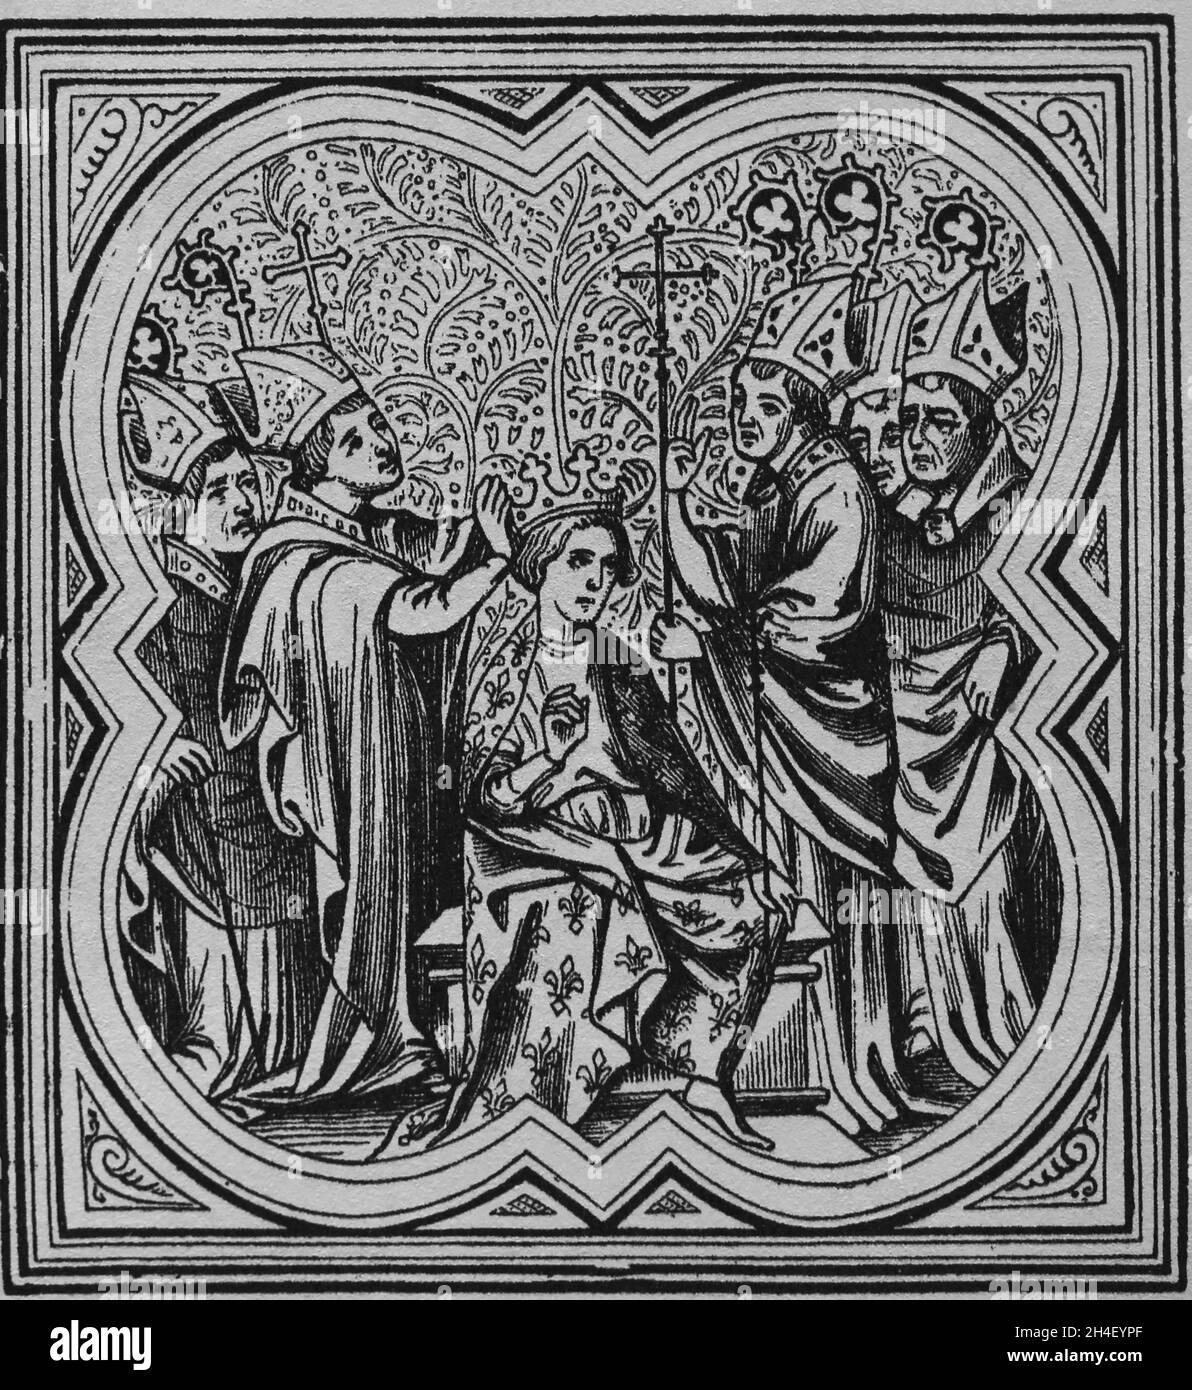 Coronation of Charlemagne, by pope Leon III, 799. A 19th version based on a original engraving of 14th century. Stock Photo